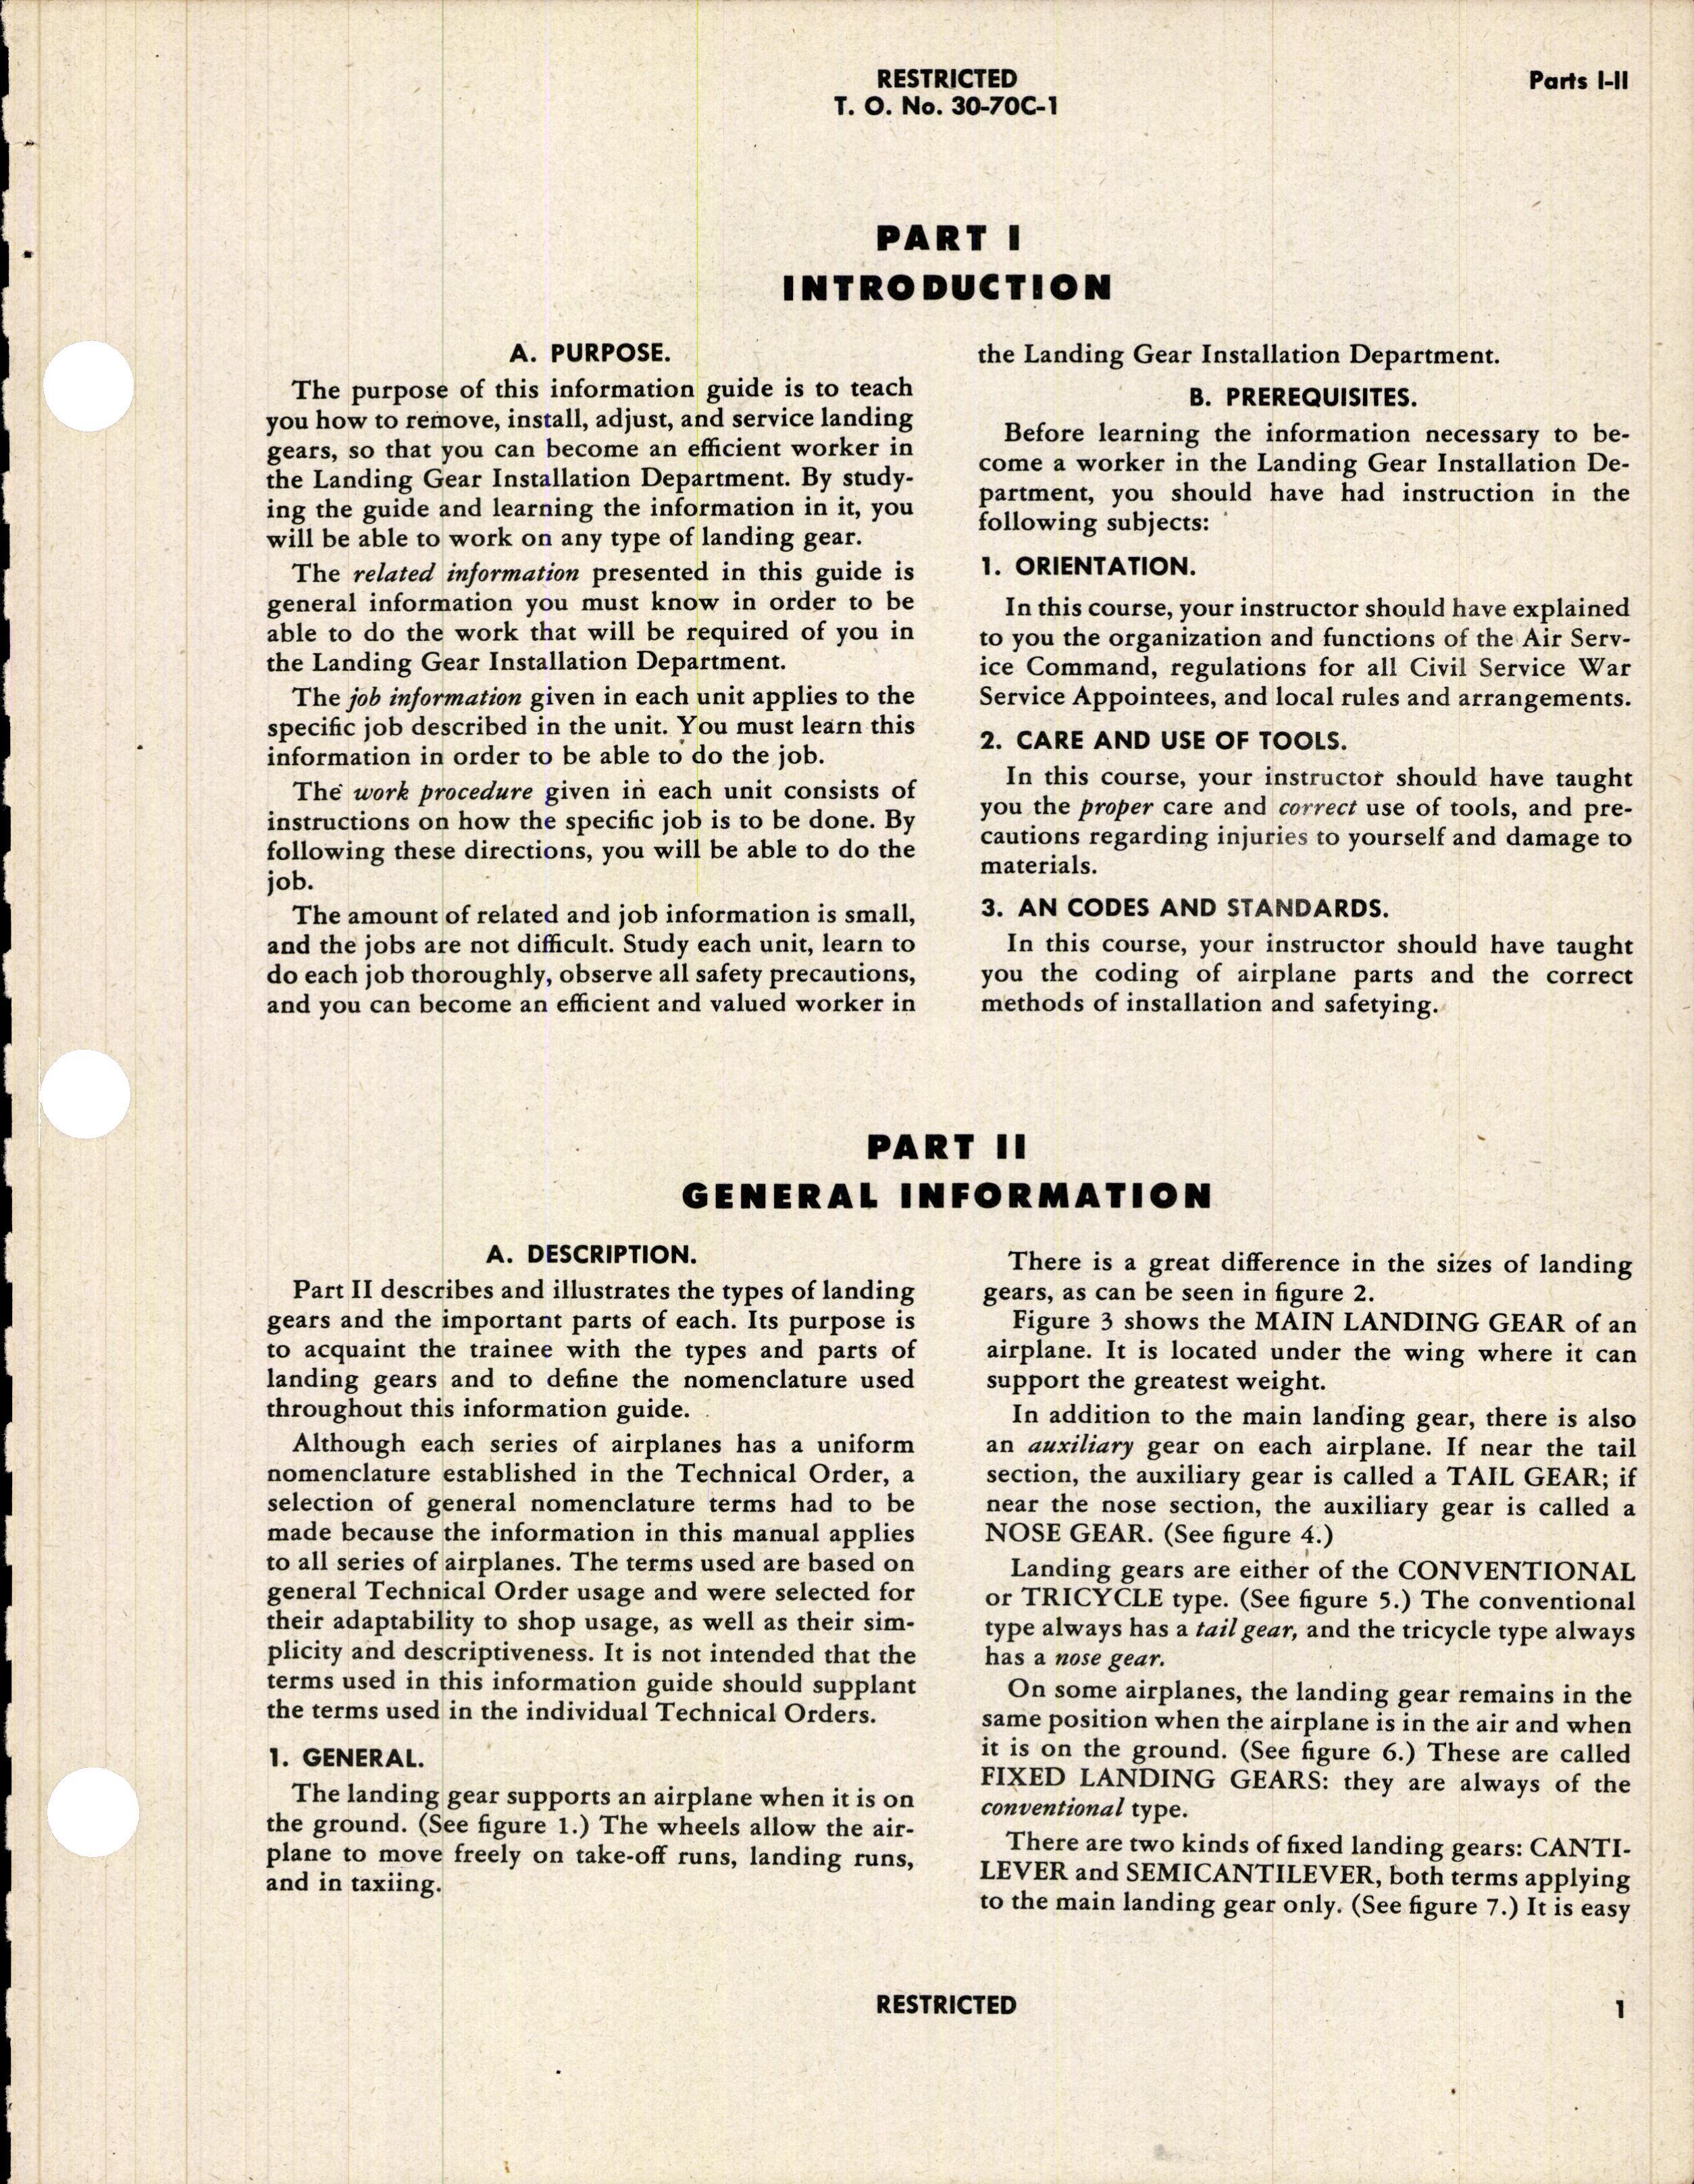 Sample page 5 from AirCorps Library document: Information Guide - Landing Gear Installation